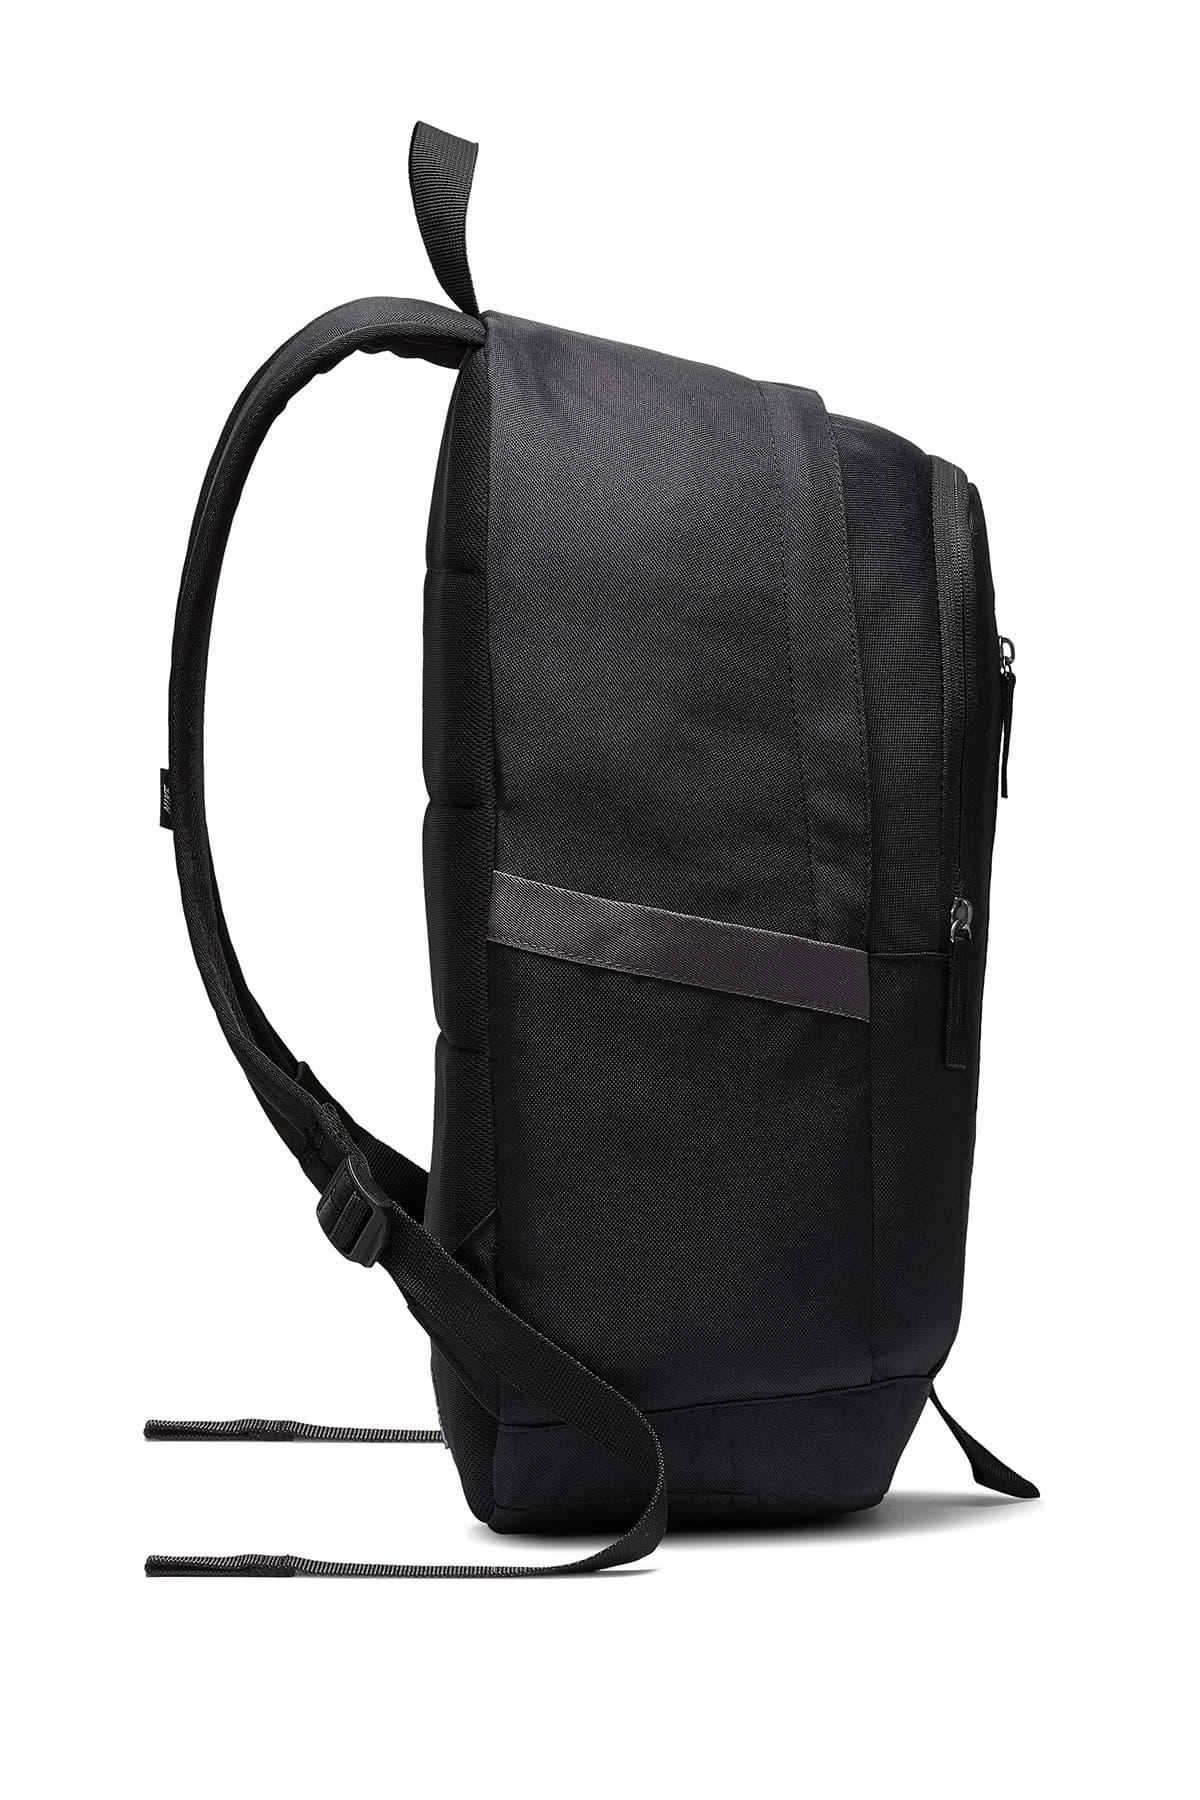 Nike Synthetic All Access Soleday Backpack in Black/White (Black) - Lyst